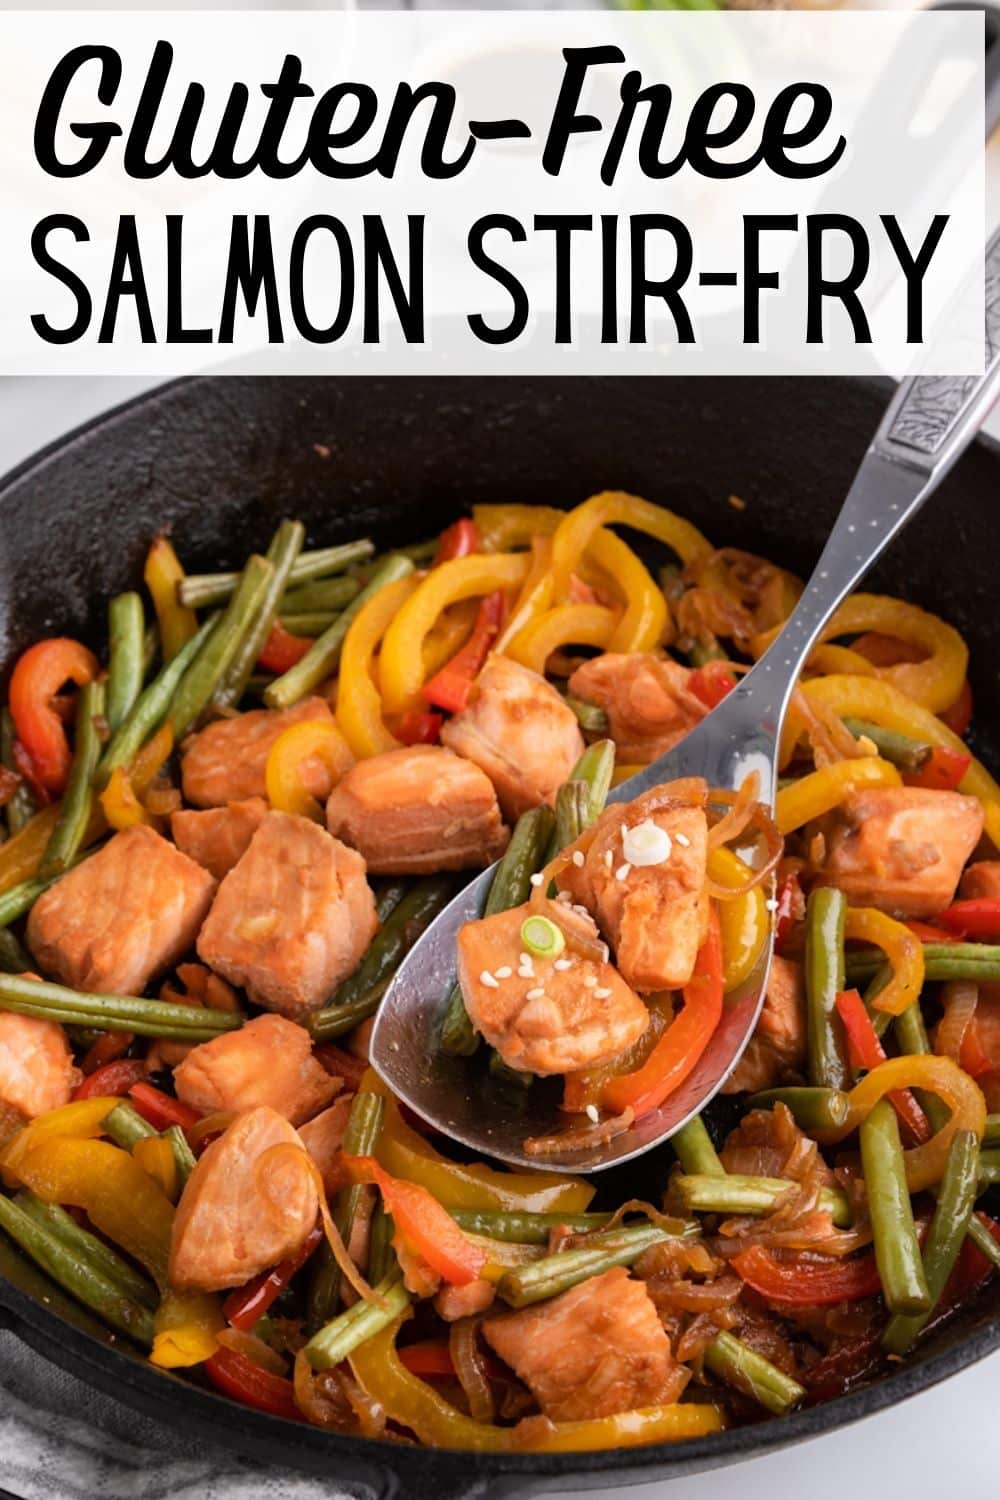 Salmon Stir-Fry With Vegetables and Sauce (Gluten-Free) - Clean Eating ...